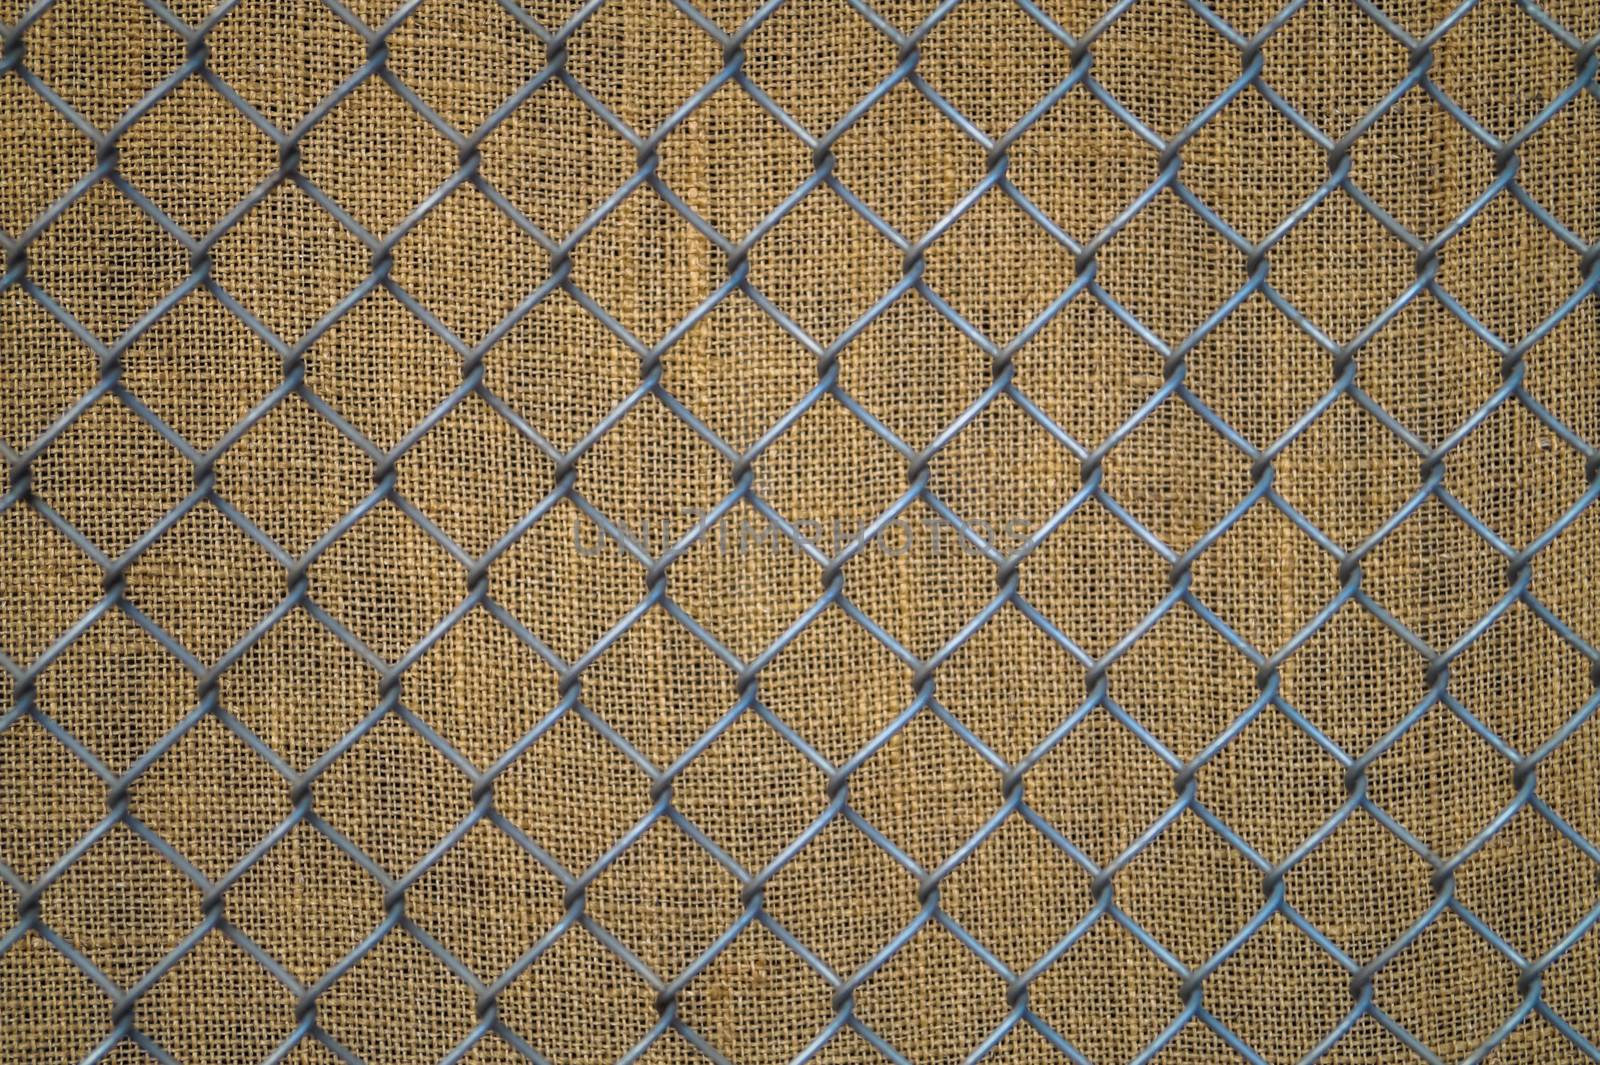 background of metal mesh on the old fabric by Oleczka11